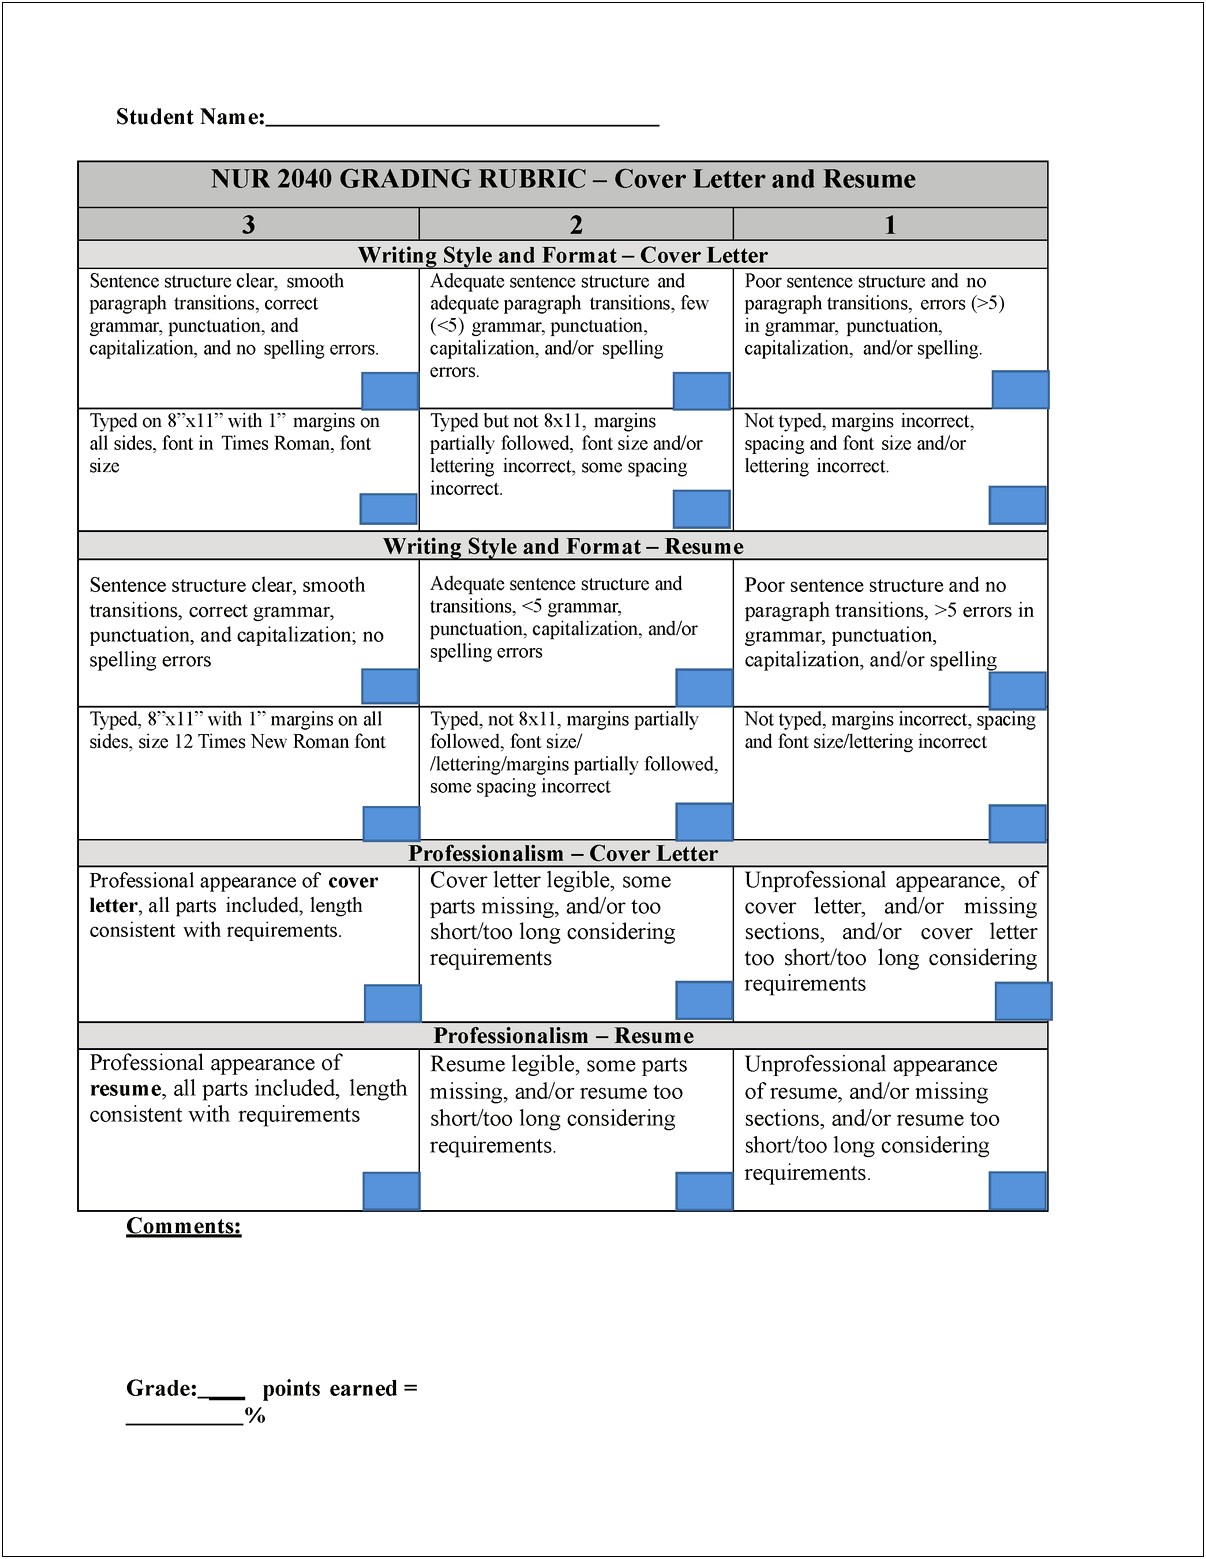 Resume And Cover Letter Grading Rubric